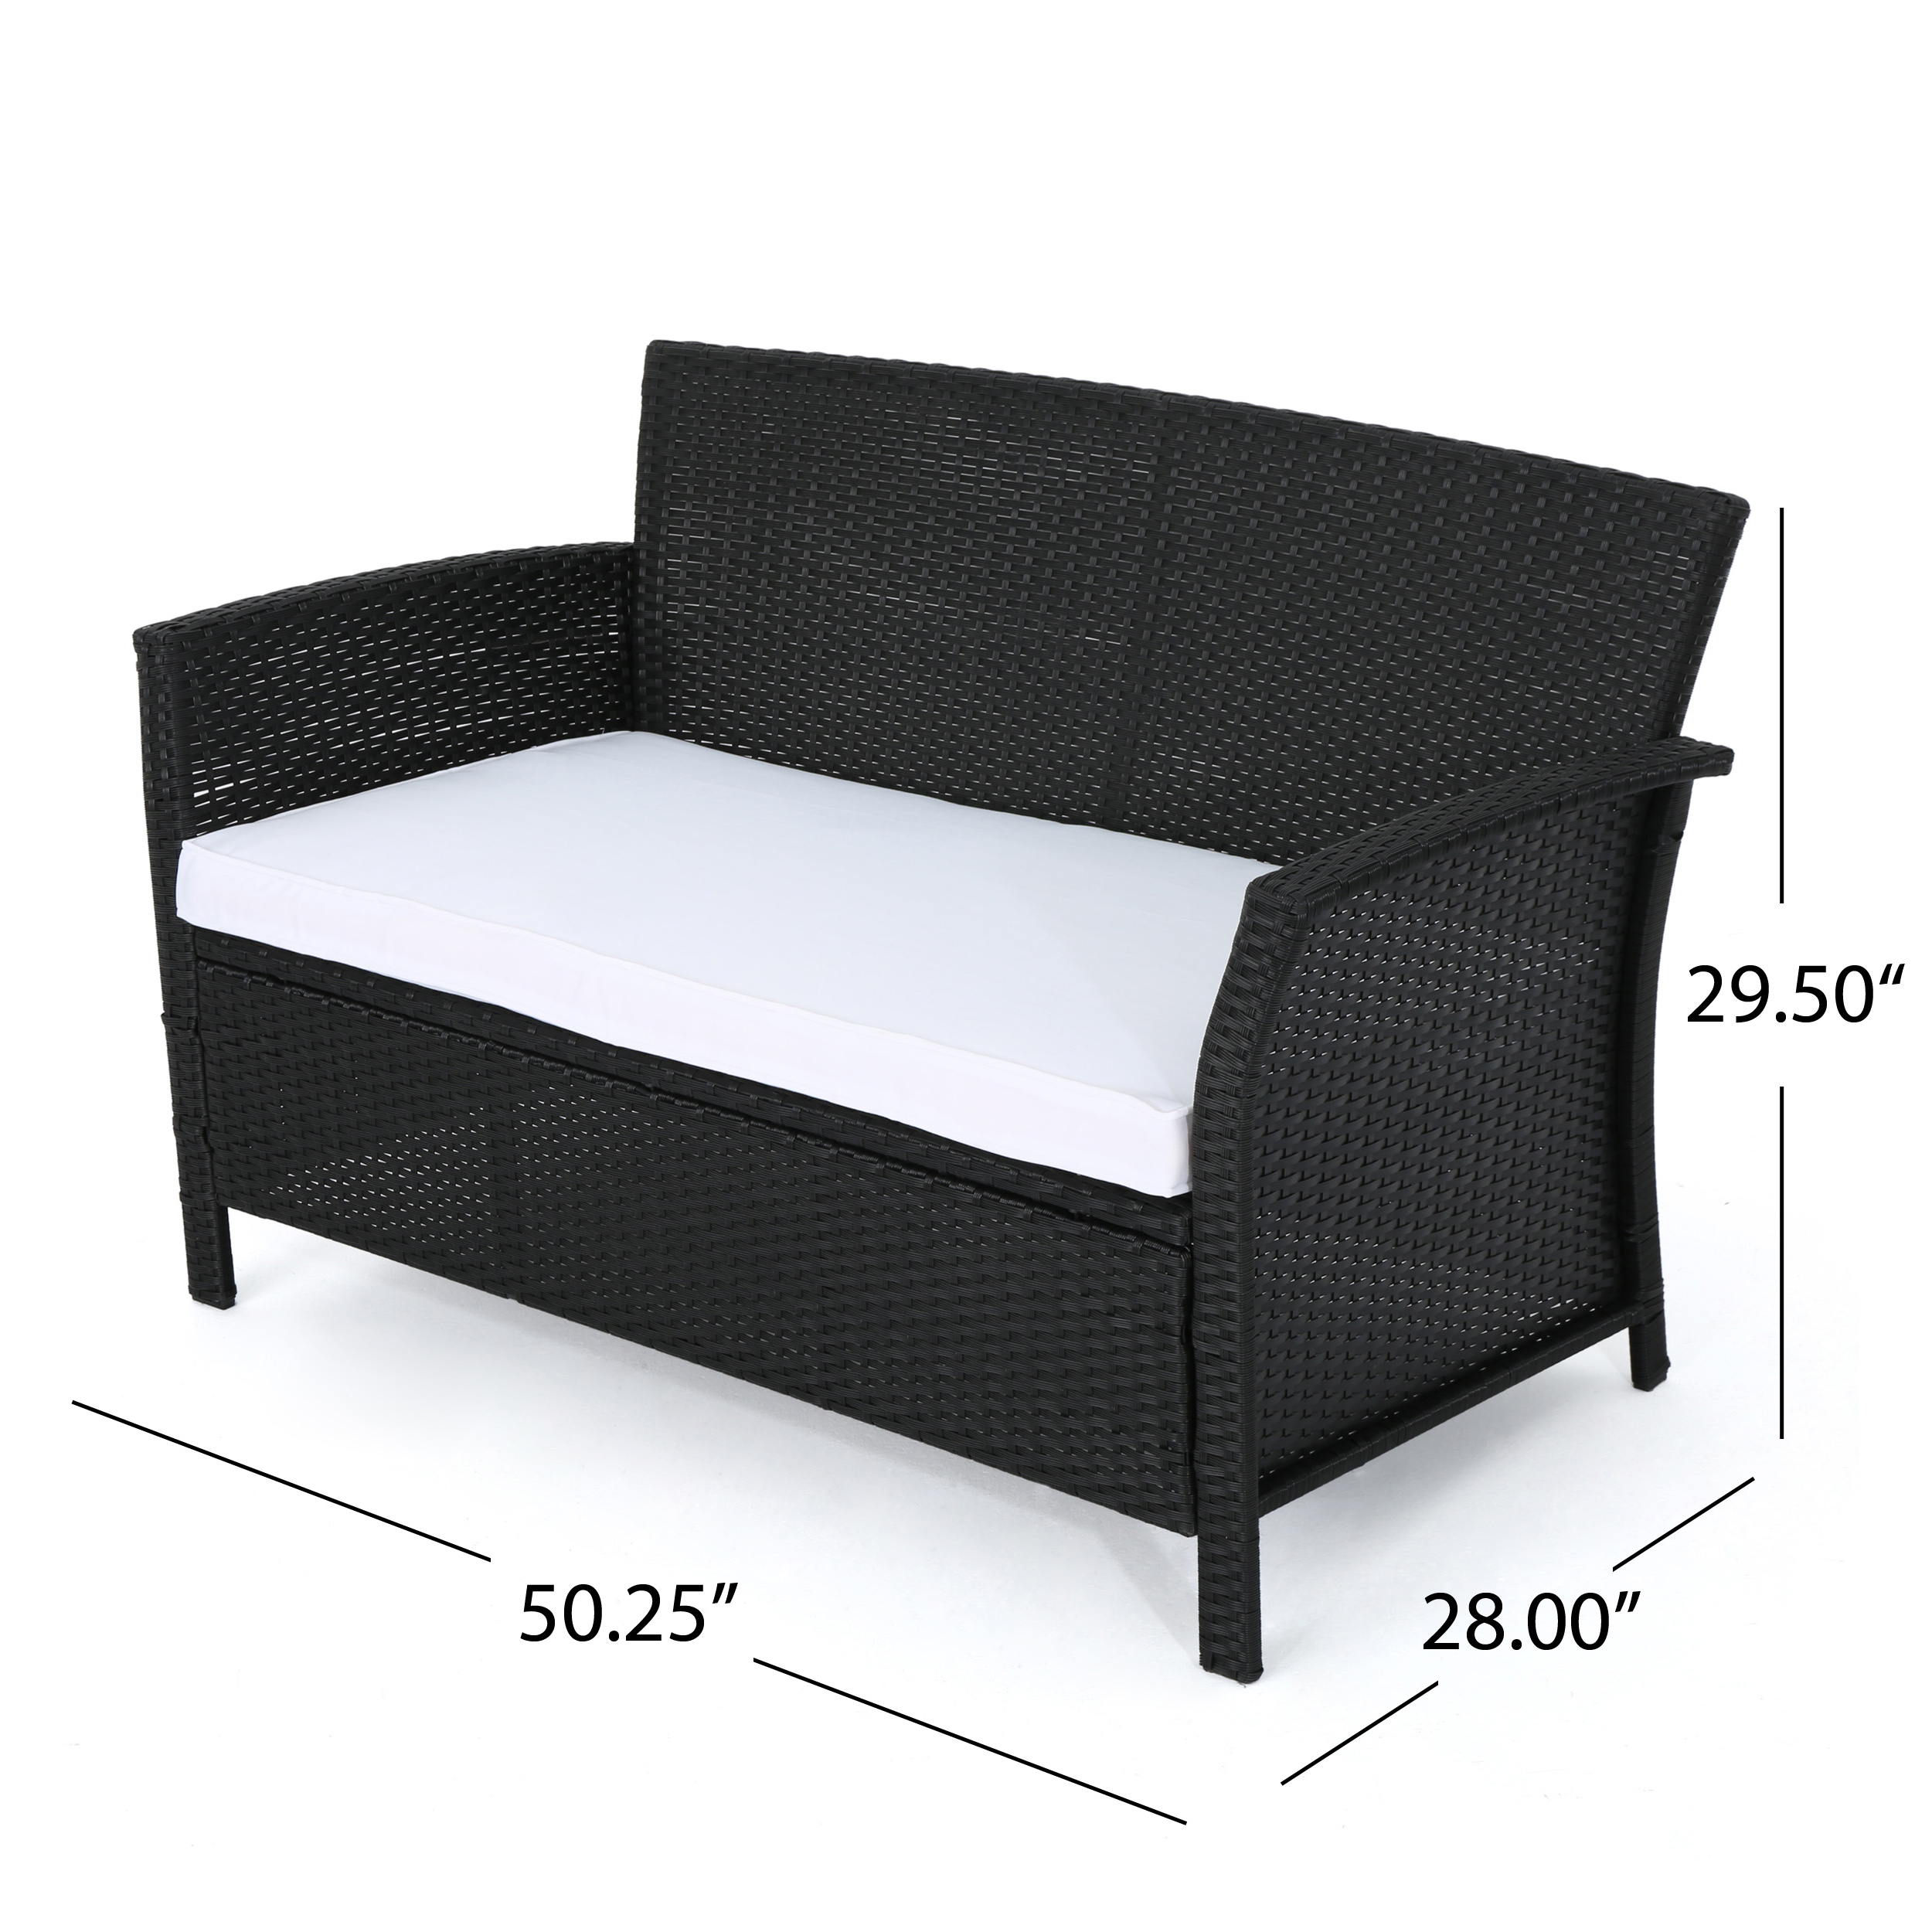 Anton Outdoor 4 Piece Wicker Chat Set with Cushions, Black, White - image 3 of 7